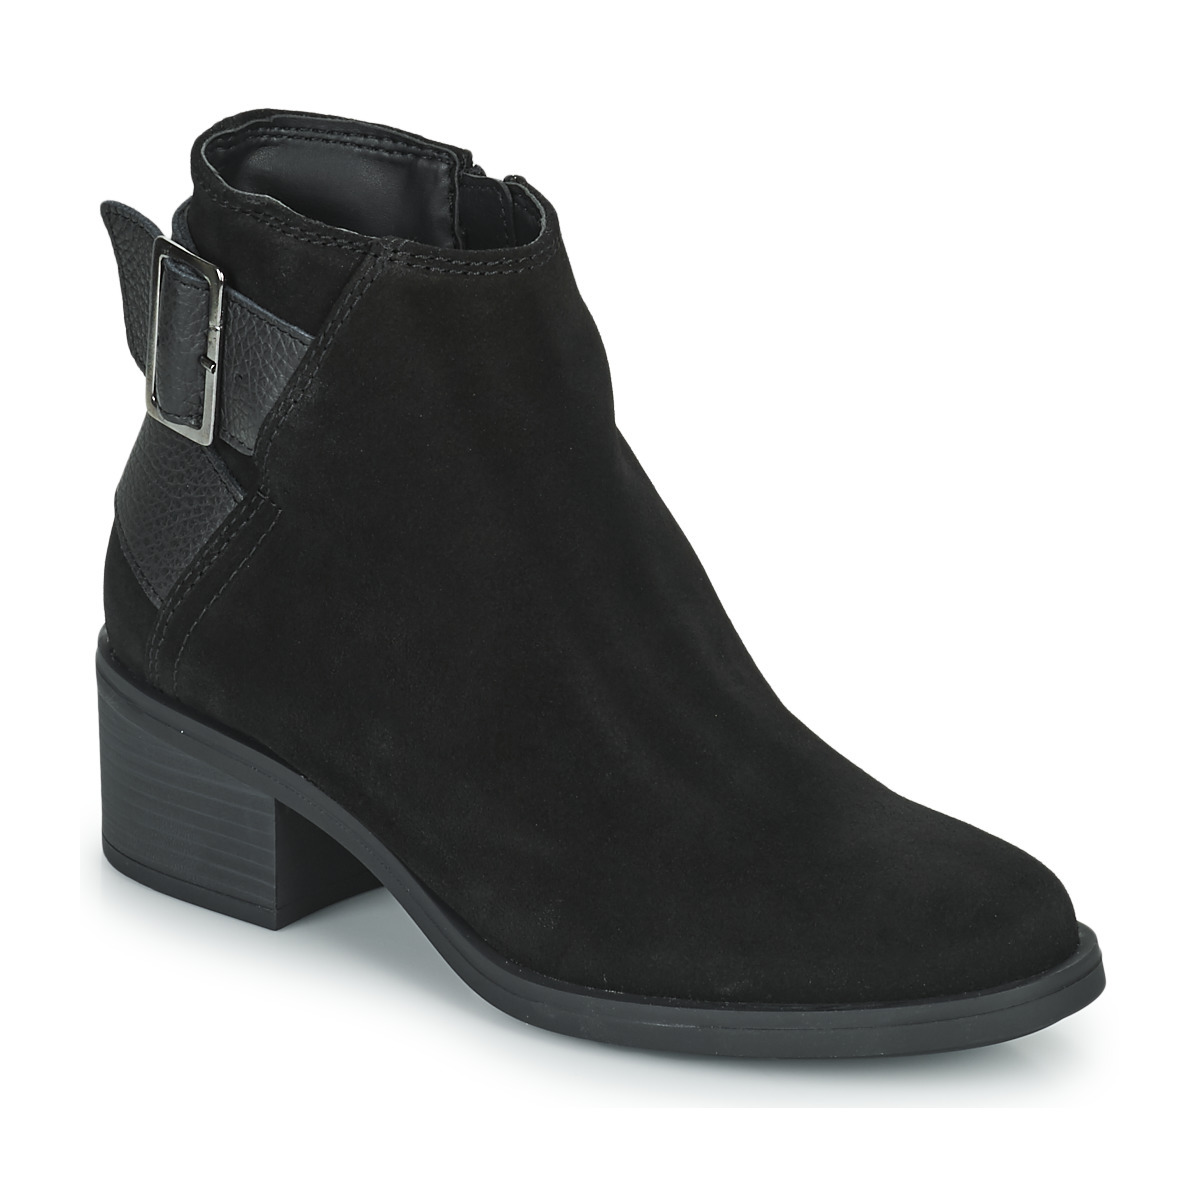 Clarks - Women's Ankle Boots Black - Spartoo GOOFASH